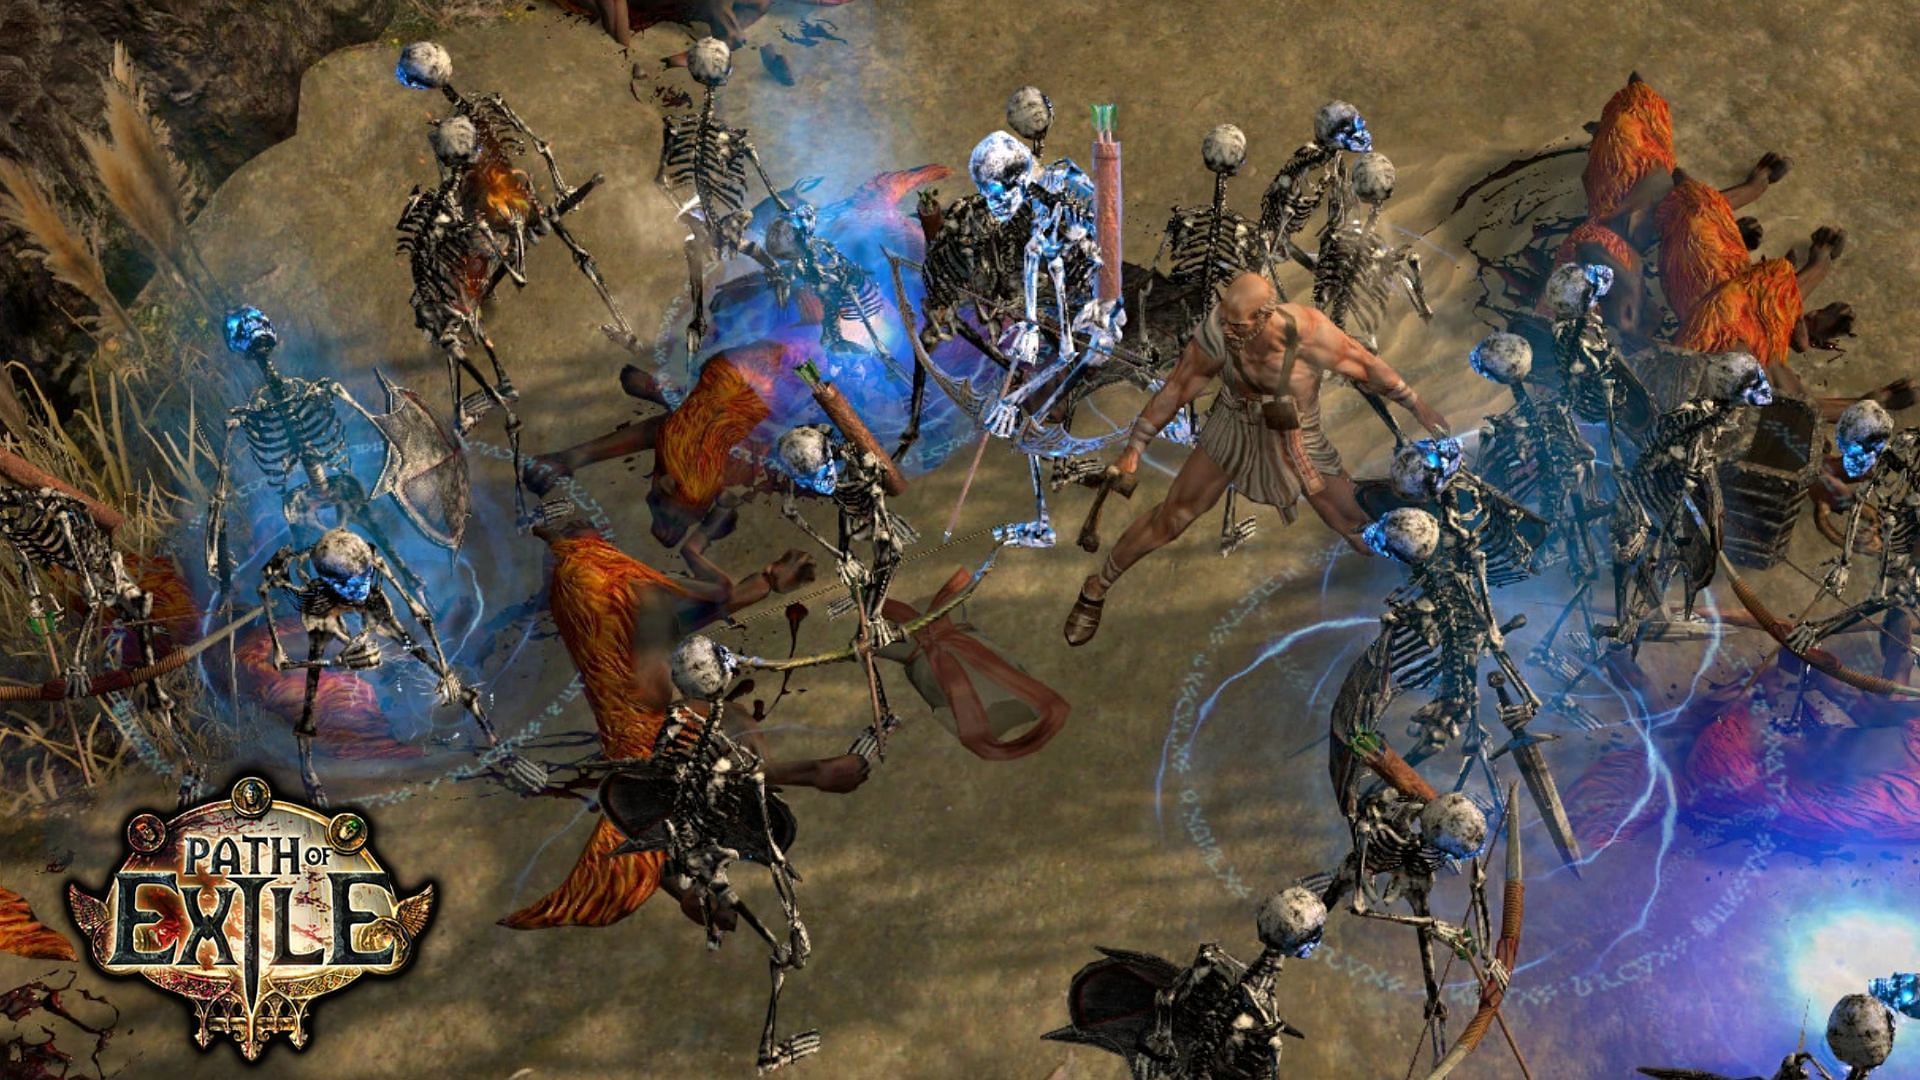 The Mage Skeleton Guardian build allows you to summon a powerful army of skeletons. (Image via Grinding Gear Games)